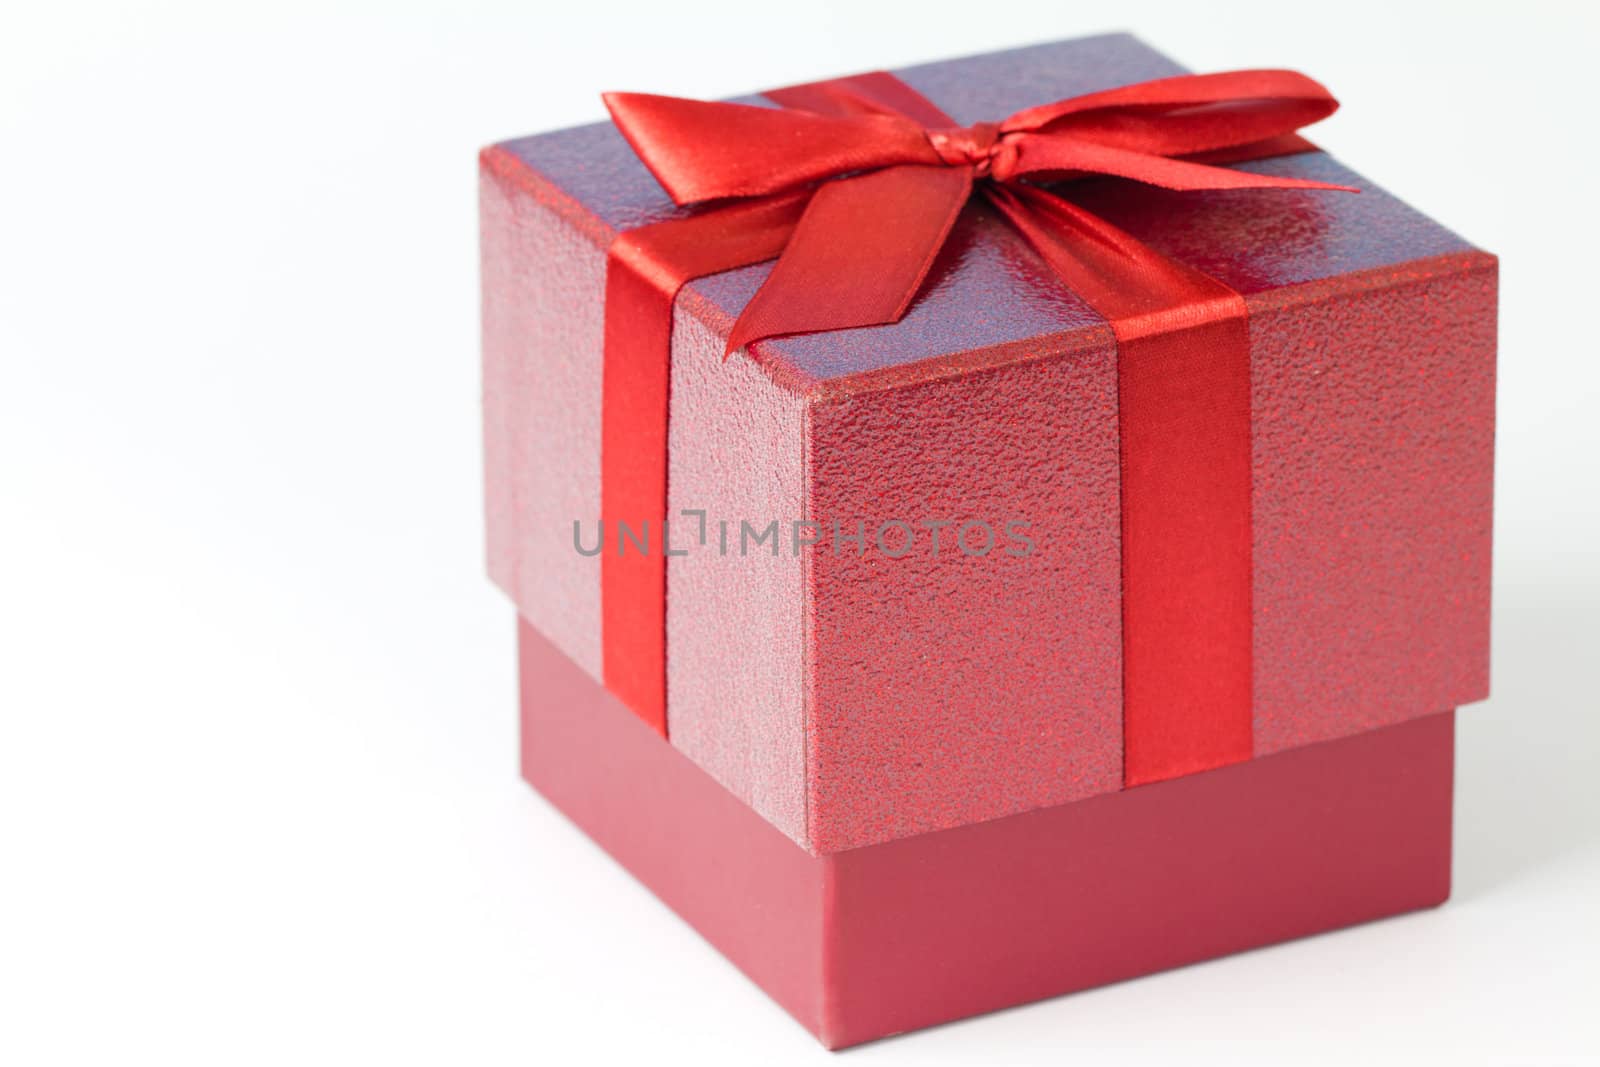 A Christmas gift with a red ribbon